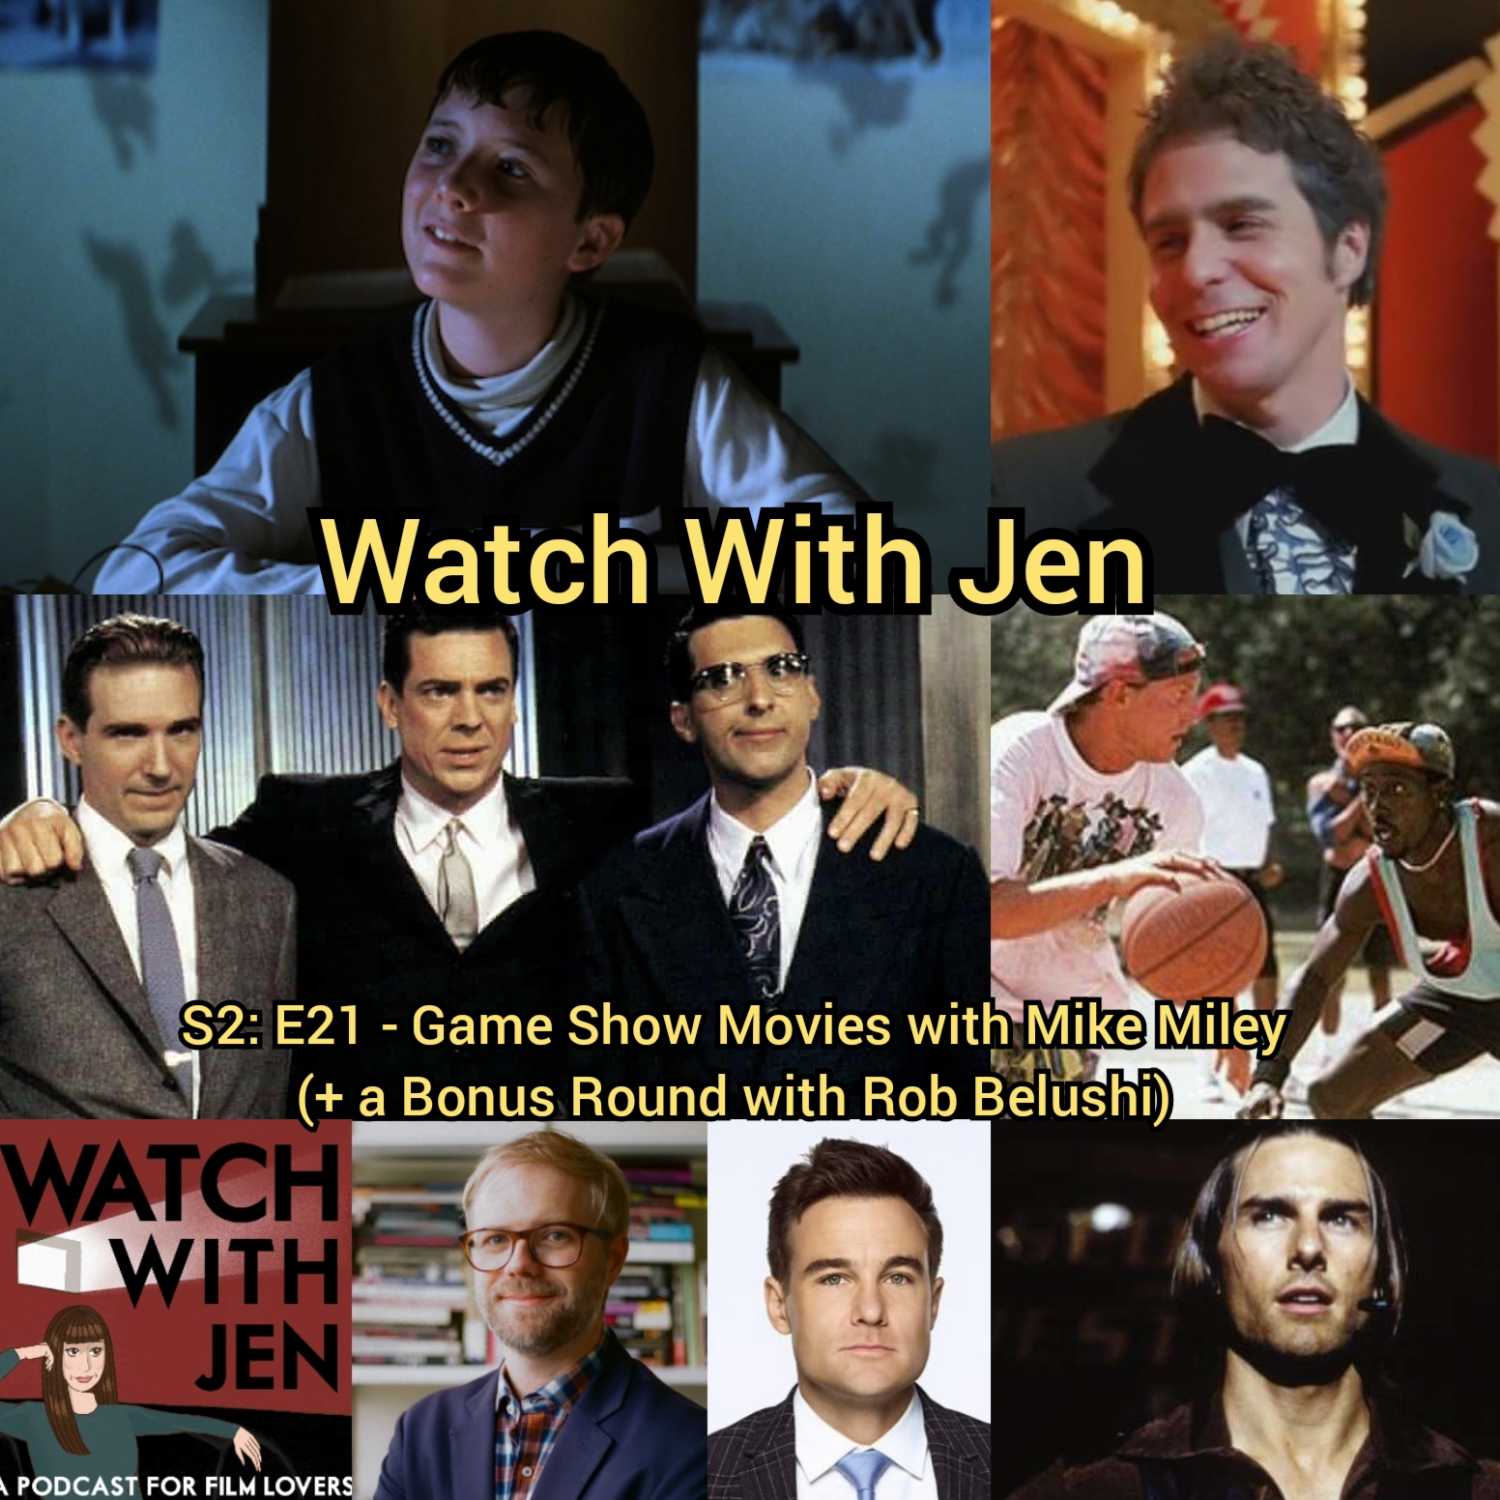 Watch With Jen - S2: E21 - Game Show Movies with Mike Miley (+ a Bonus Round with Rob Belushi)